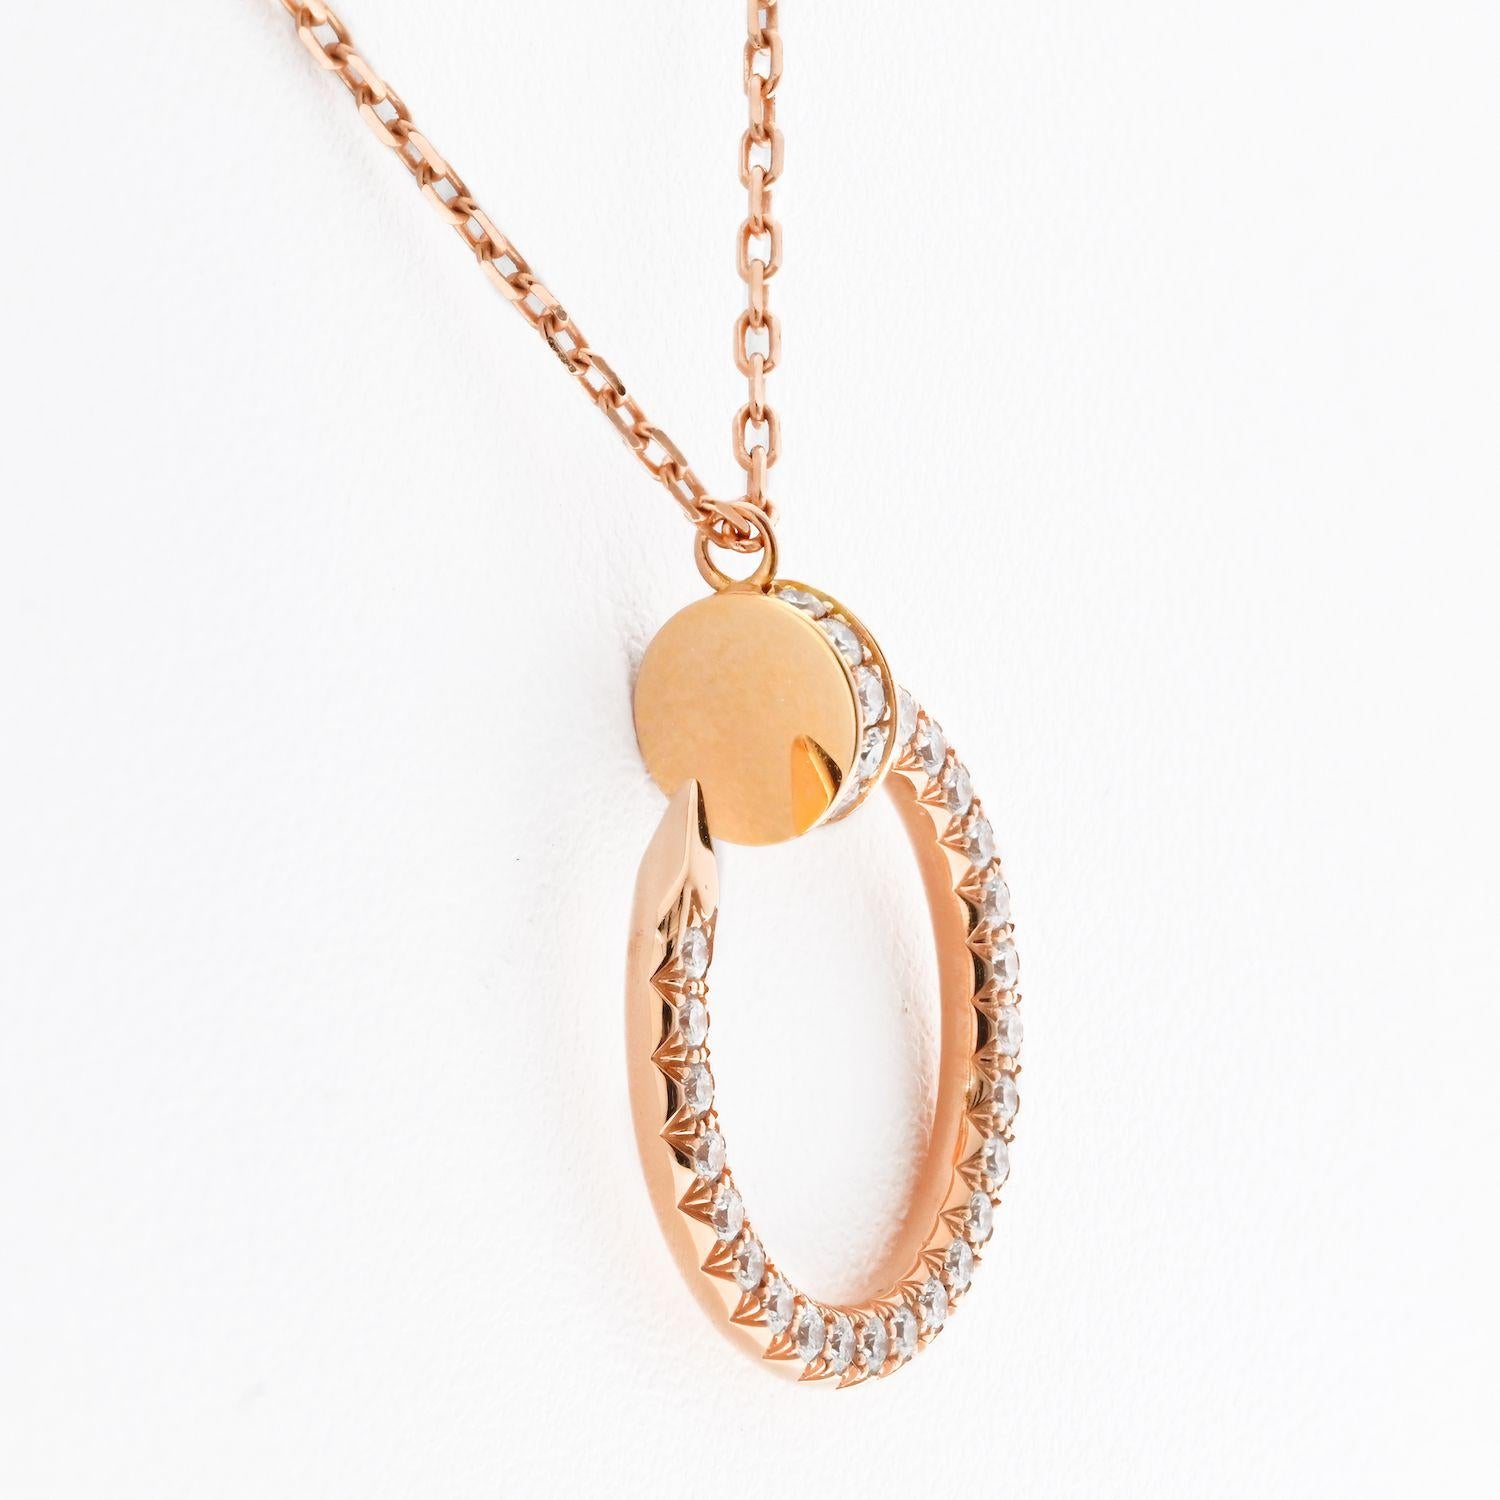 Cartier Juste Un Clou 18K Rose Gold Juste Un Clou Pave Diamond Pendant Necklace.
Delicate Juste Un Clou diamond pendant on a chain. Elegant and feminine this pendant by Cartier makes a perfect gift for someone young and flirty. Excellent condition,